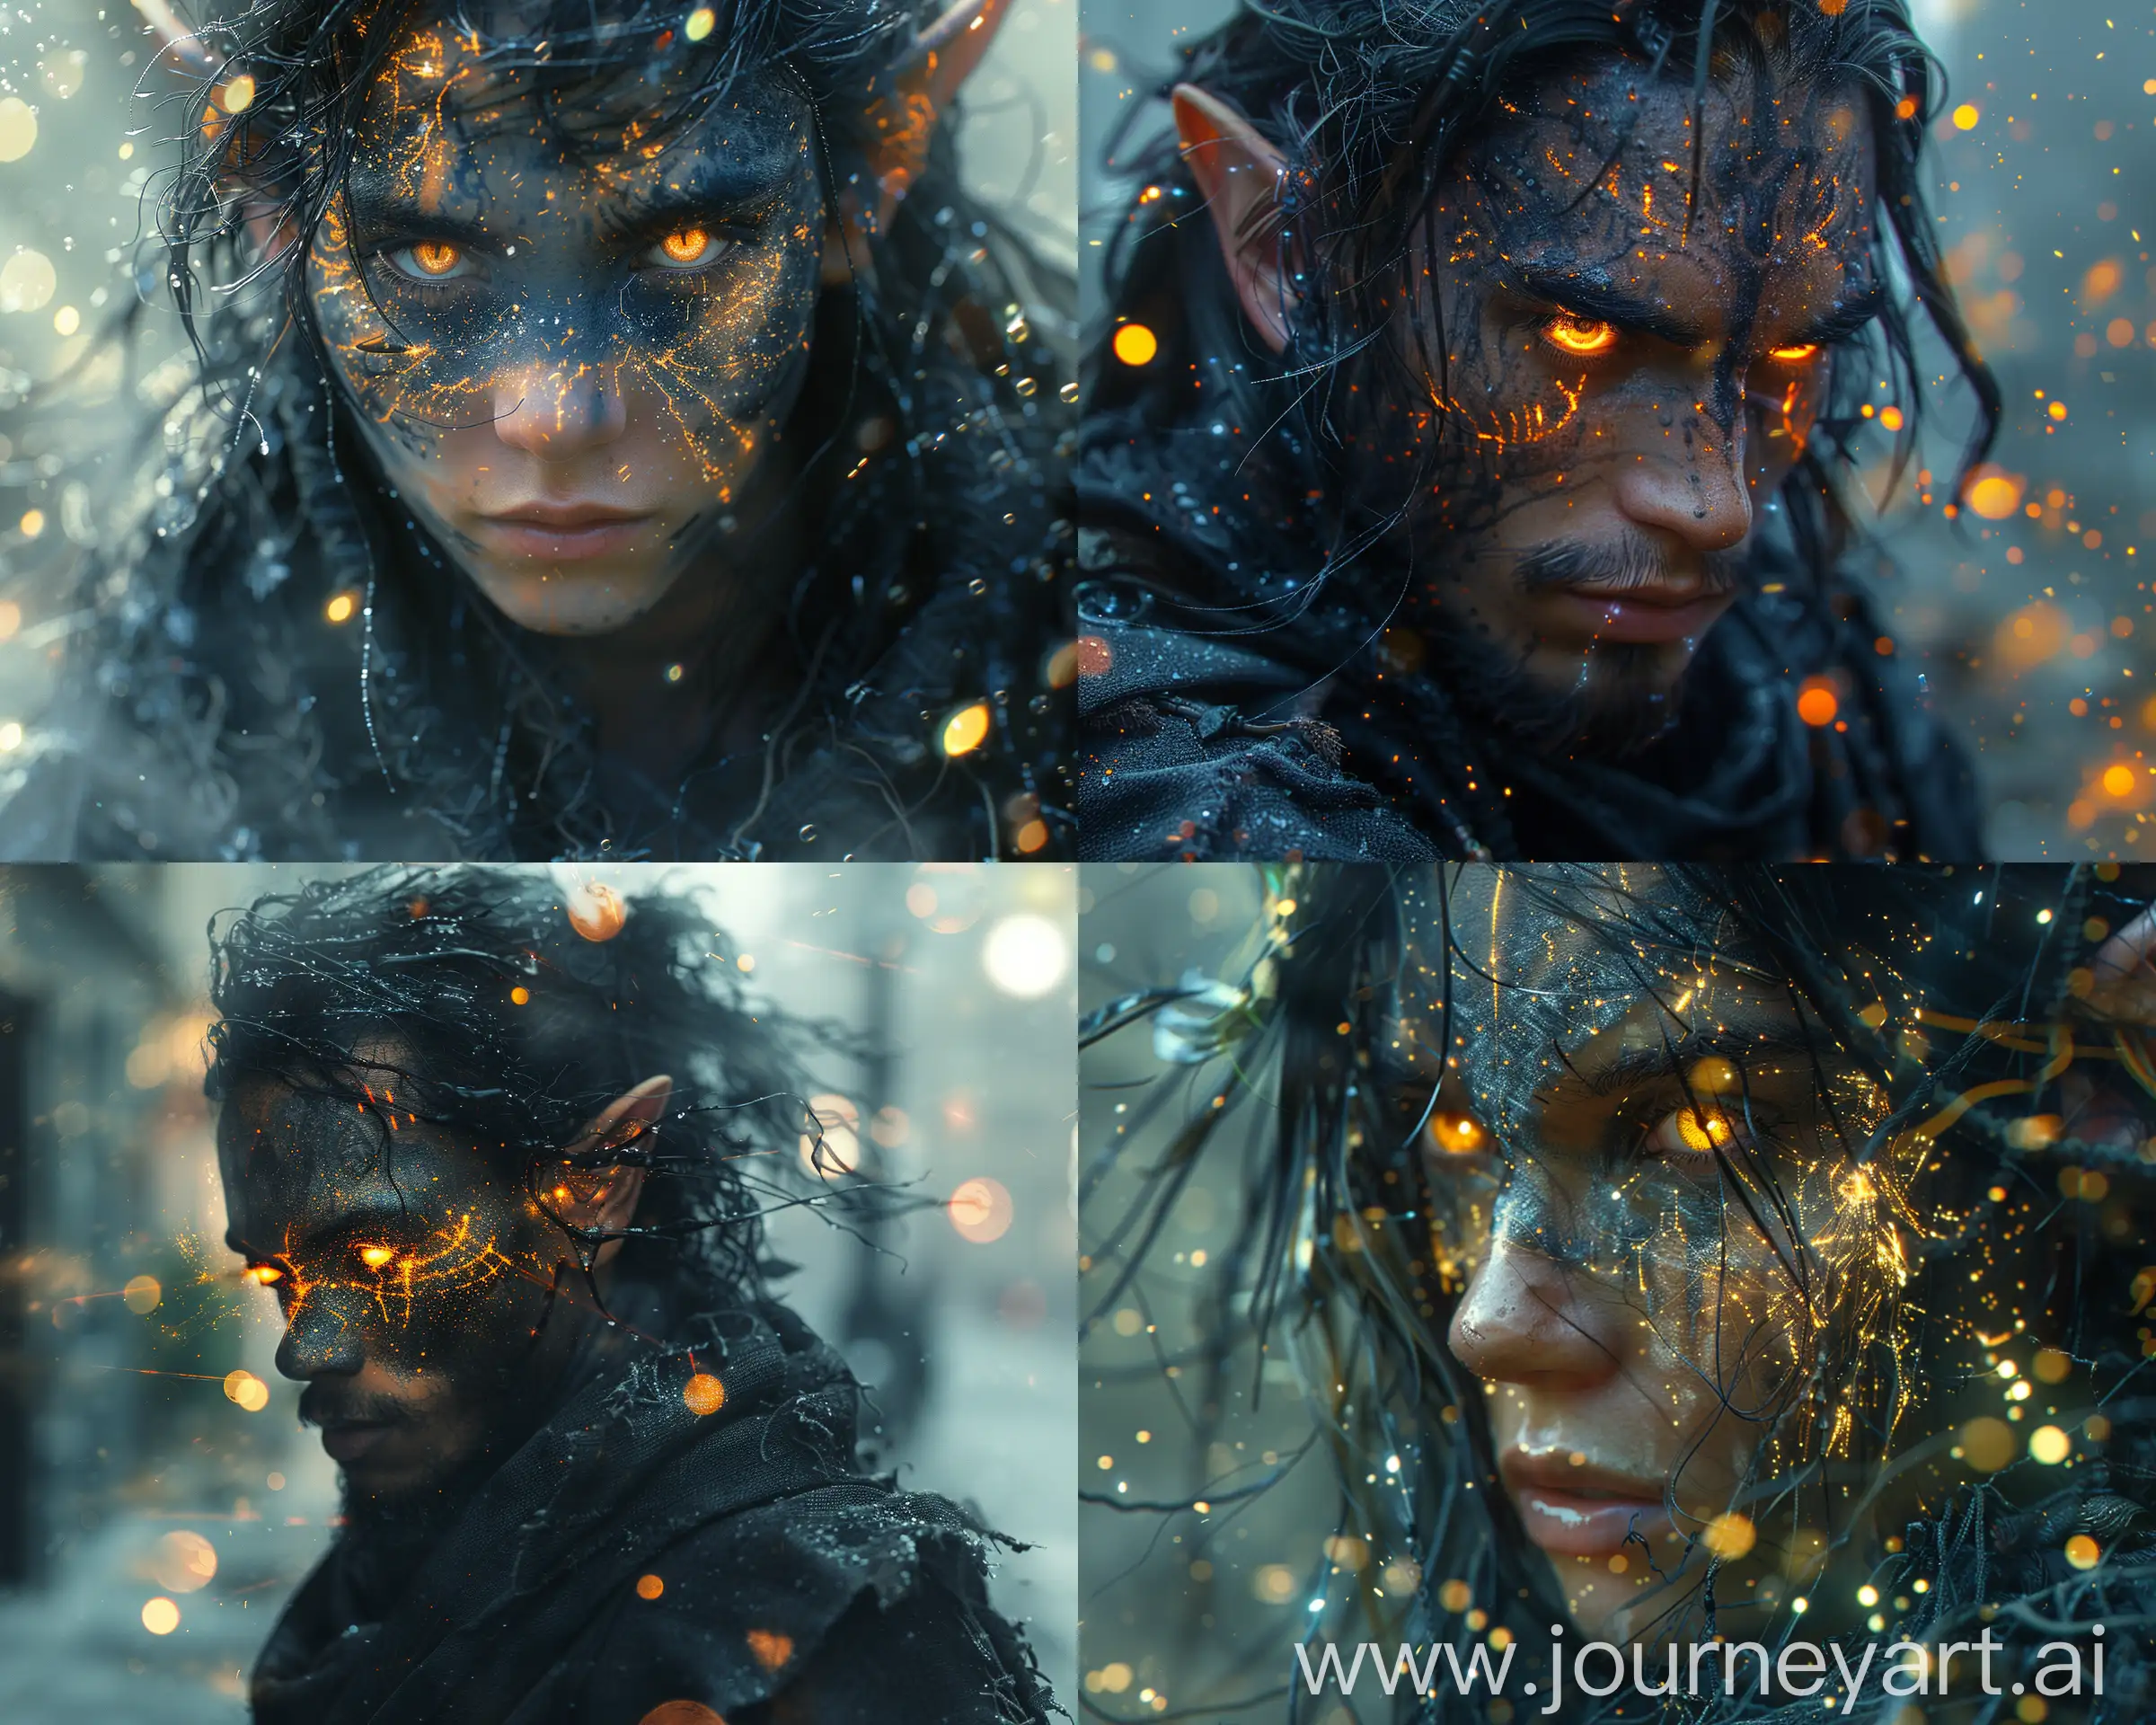 By Carlos Quevedo, Mehdi Hadi. Alphonso Dunn. ELF KING, epic fantasy[wild cyborg_elf_andriod, wild eyes; ragged black robe; (visible text:1.2) (code scripts scripting language 2.0), glowing runic face paint, particles in the air, transparent glowing shimmering circles: 2.0] split image, Amazing unique creation. Color depth. --ar 5:4 --s 850